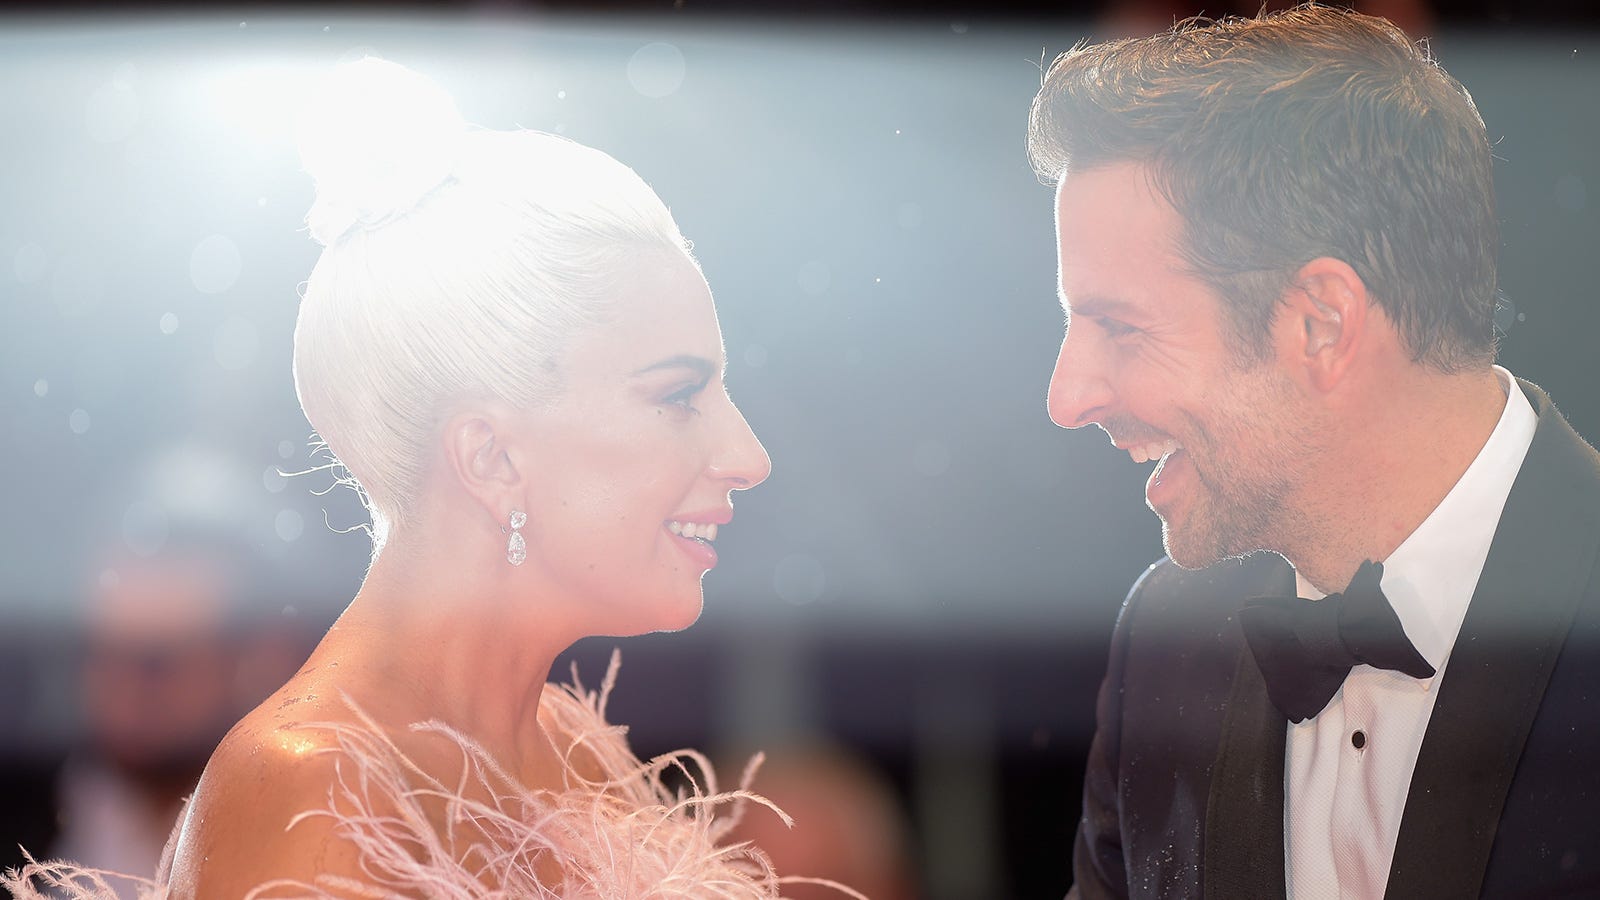 Bradley Cooper Denies Knowledge of Star Is Born Producer's Past1600 x 900